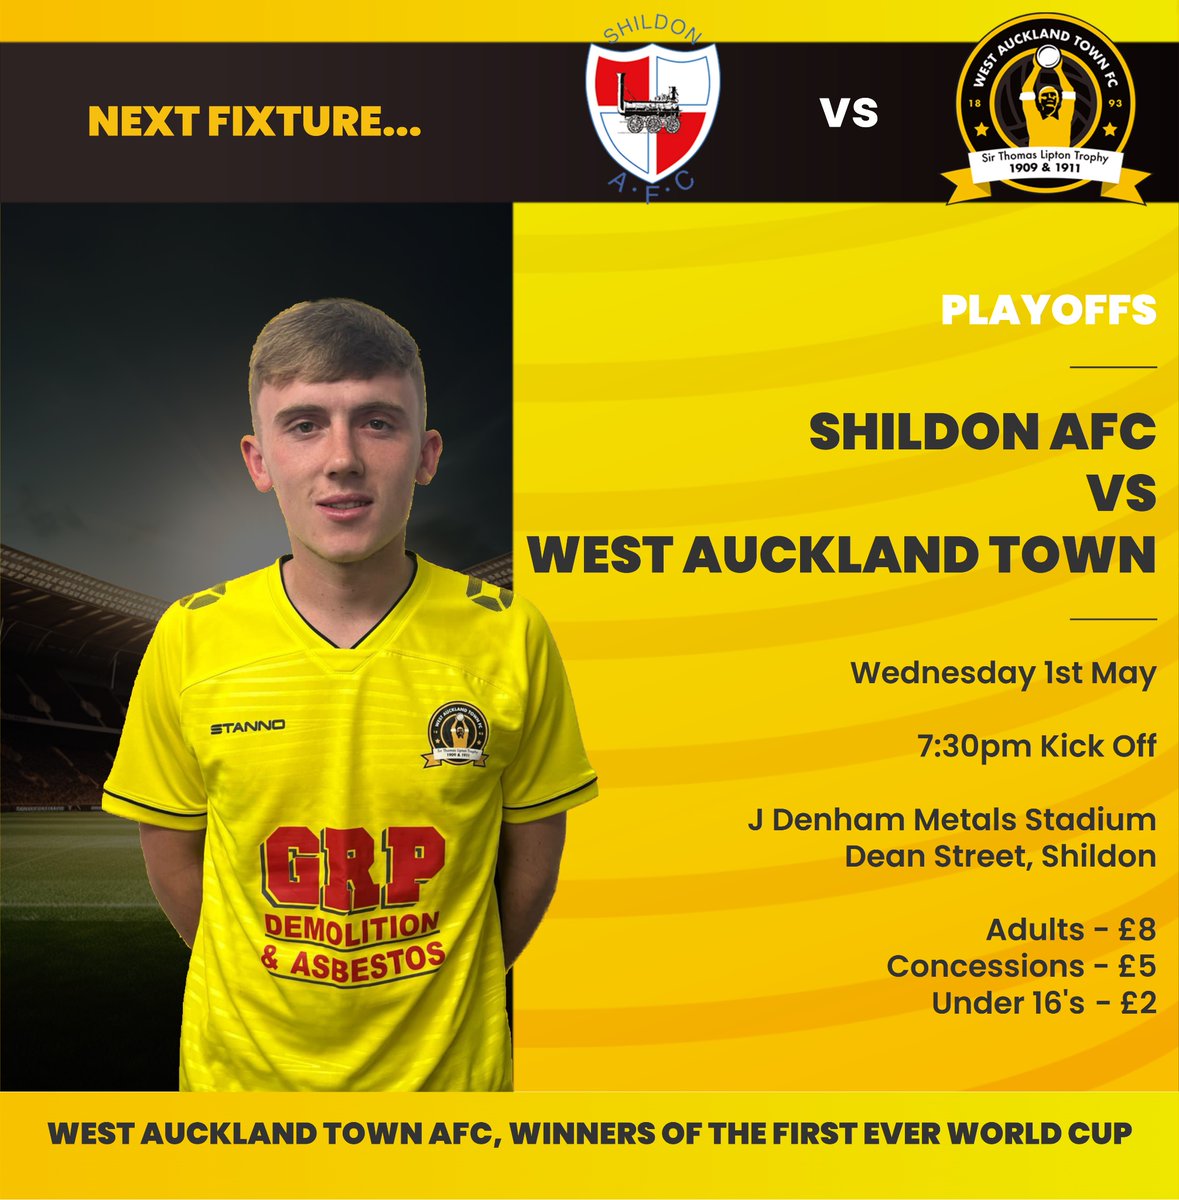 Next up….. We take the short journey up to Shildon in the play offs this Wednesday 7:30 kick off Let's get a good crowd behind the lads See ya there ⚽️